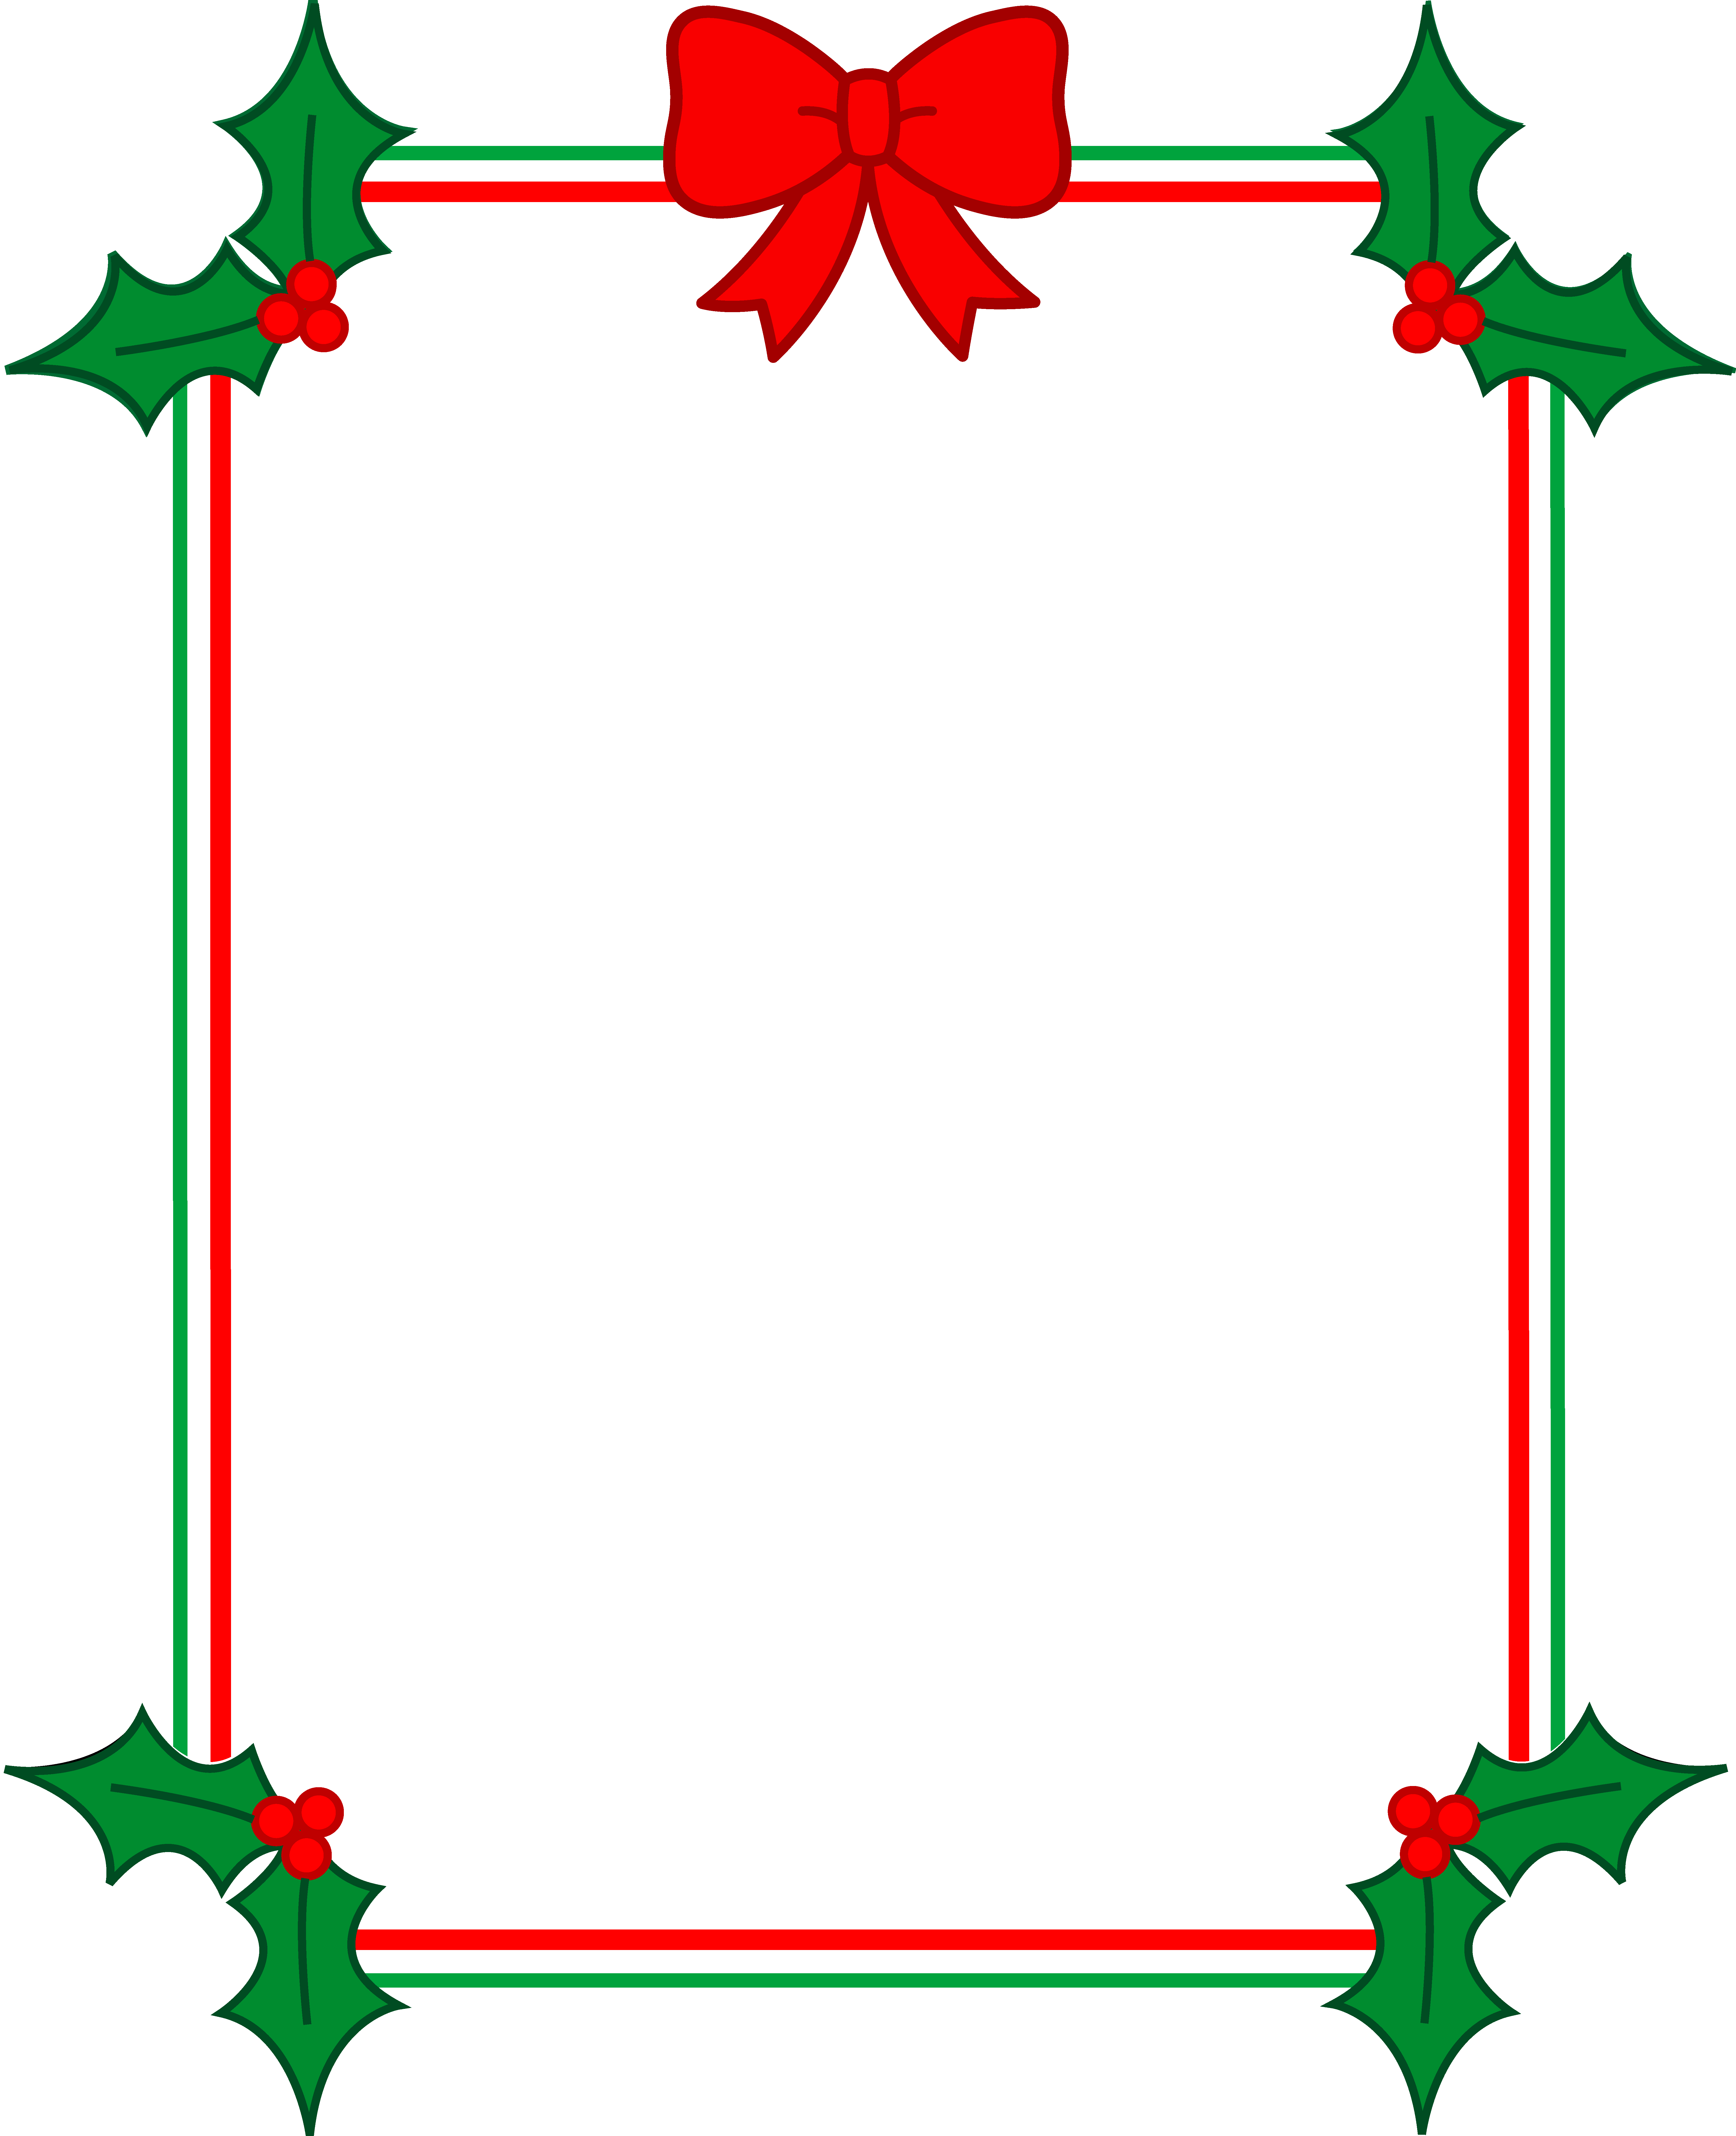 Holiday clipart picture frame. Christmas border with holly